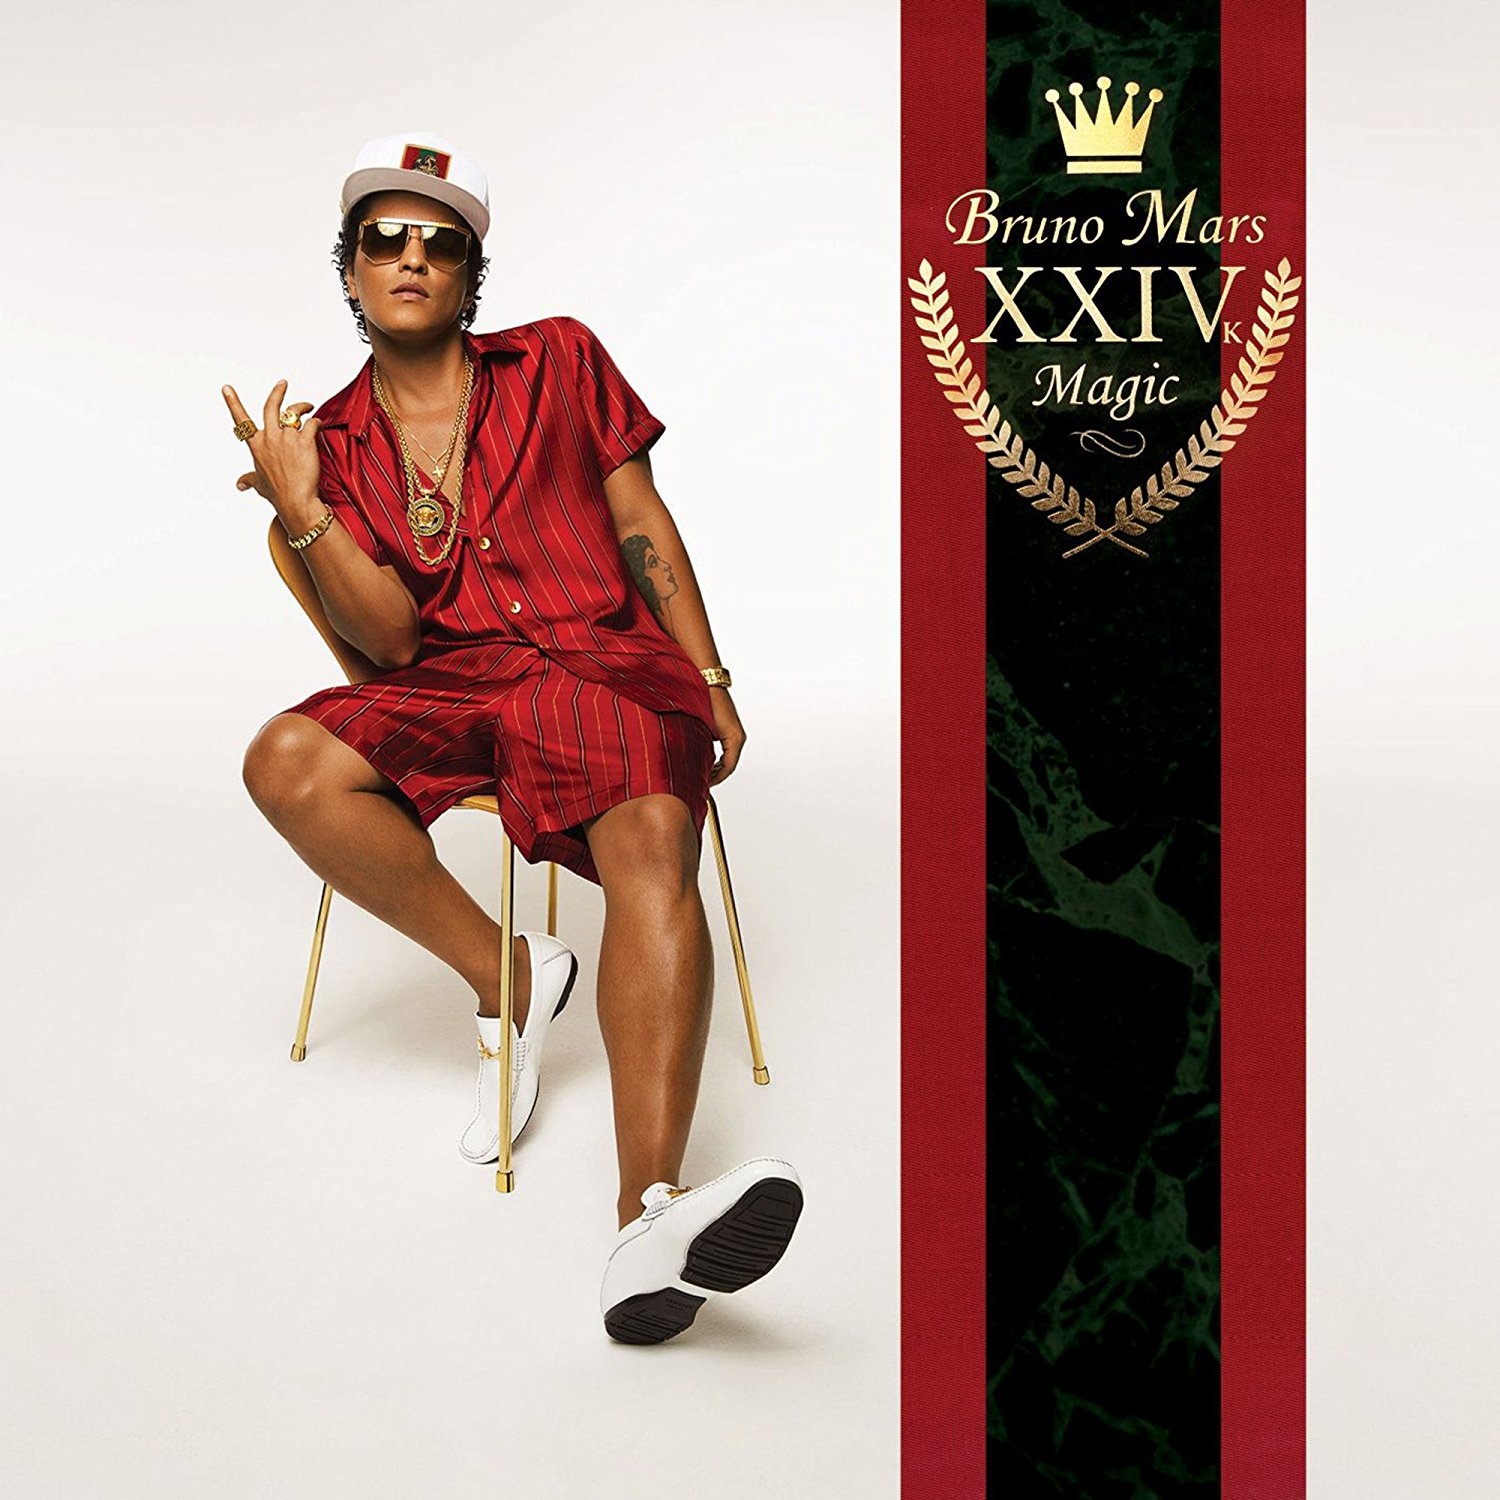 New Bruno Mars Song 'Versace on the Floor' Is A Sensual Slow Jam